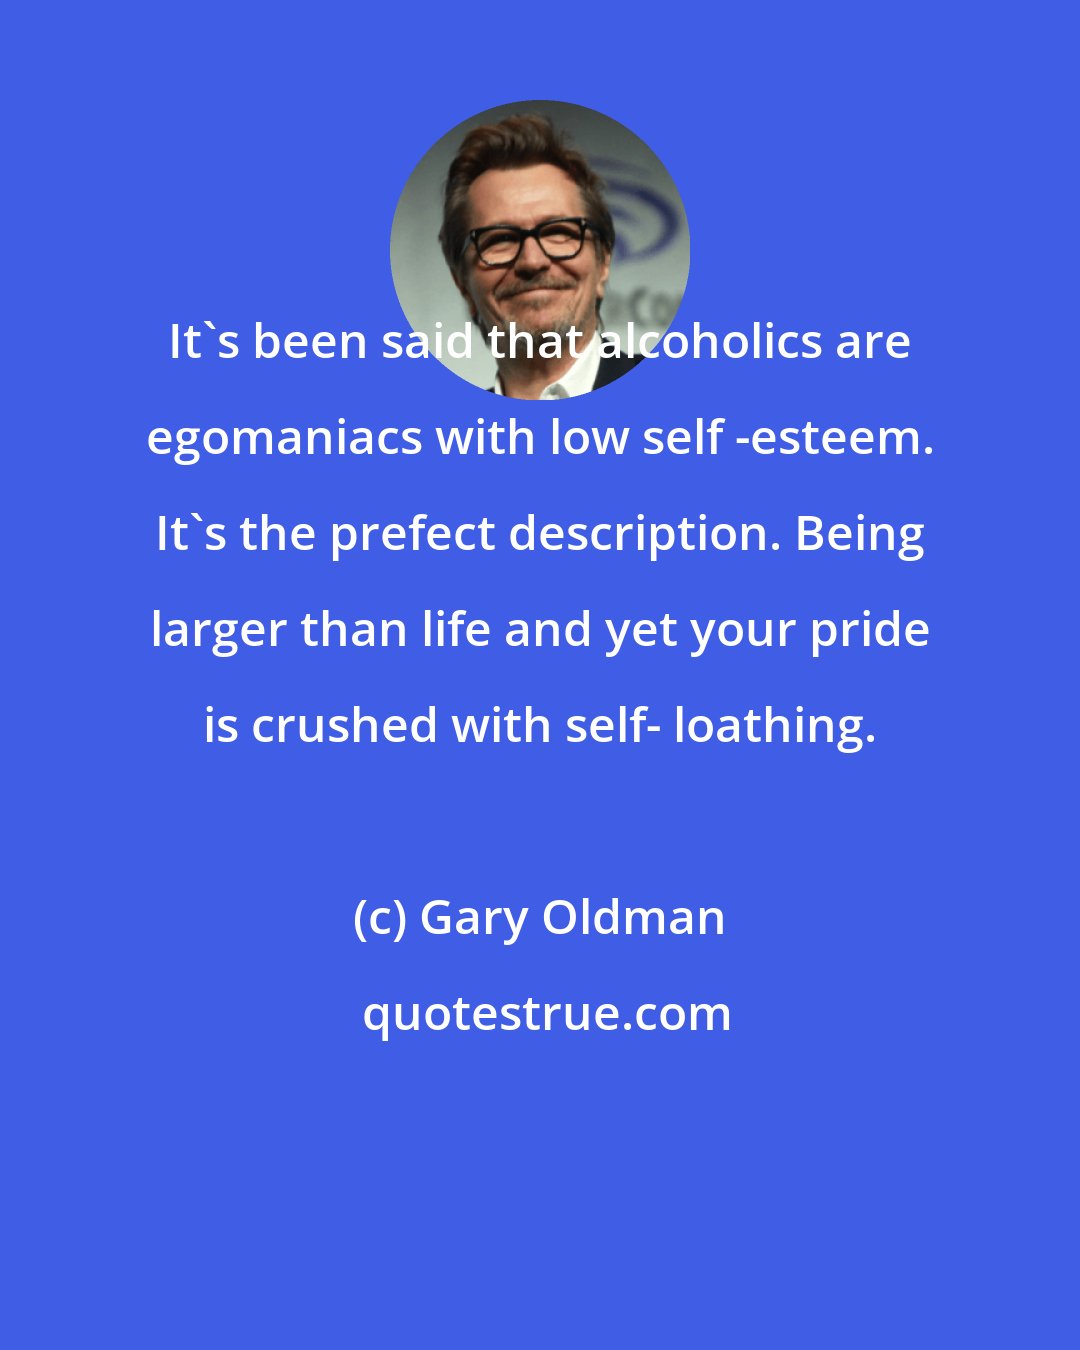 Gary Oldman: It's been said that alcoholics are egomaniacs with low self -esteem. It's the prefect description. Being larger than life and yet your pride is crushed with self- loathing.